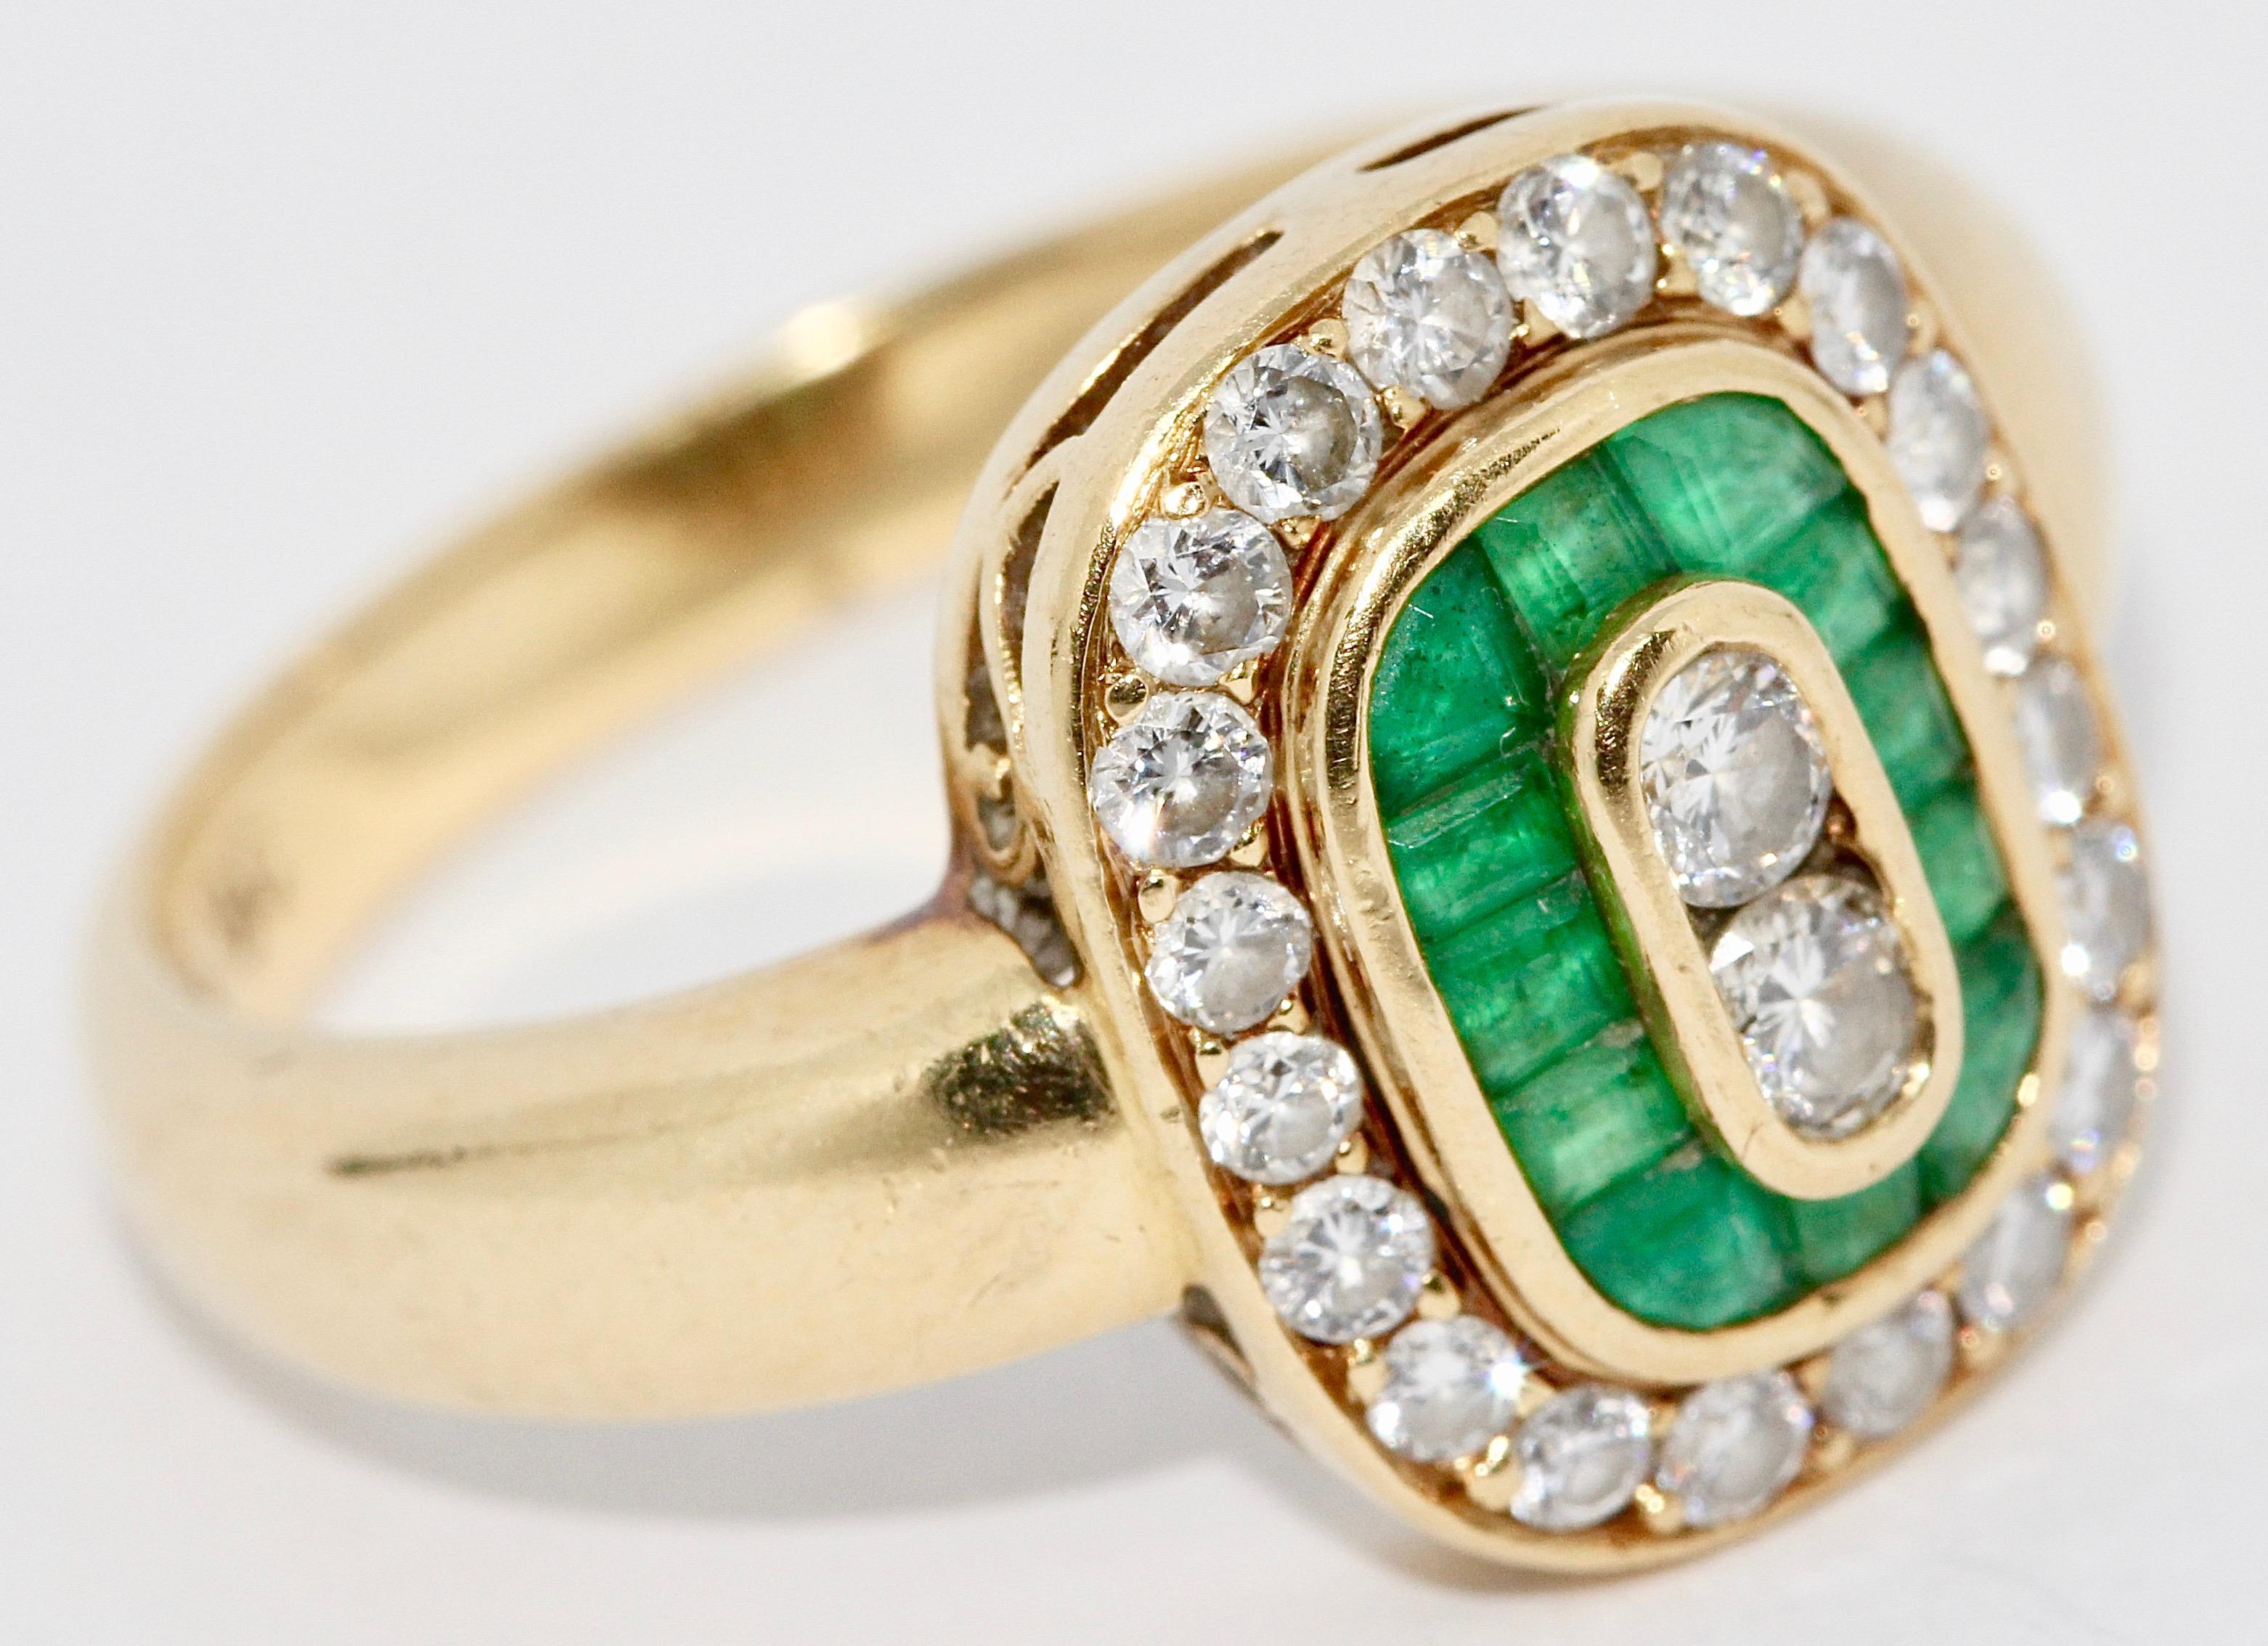 Elegant Diamond Ring, 18 Karat Gold with Emeralds.

The diamonds are of a very good quality.
Hallmarked: 750.

US Ring size: 6